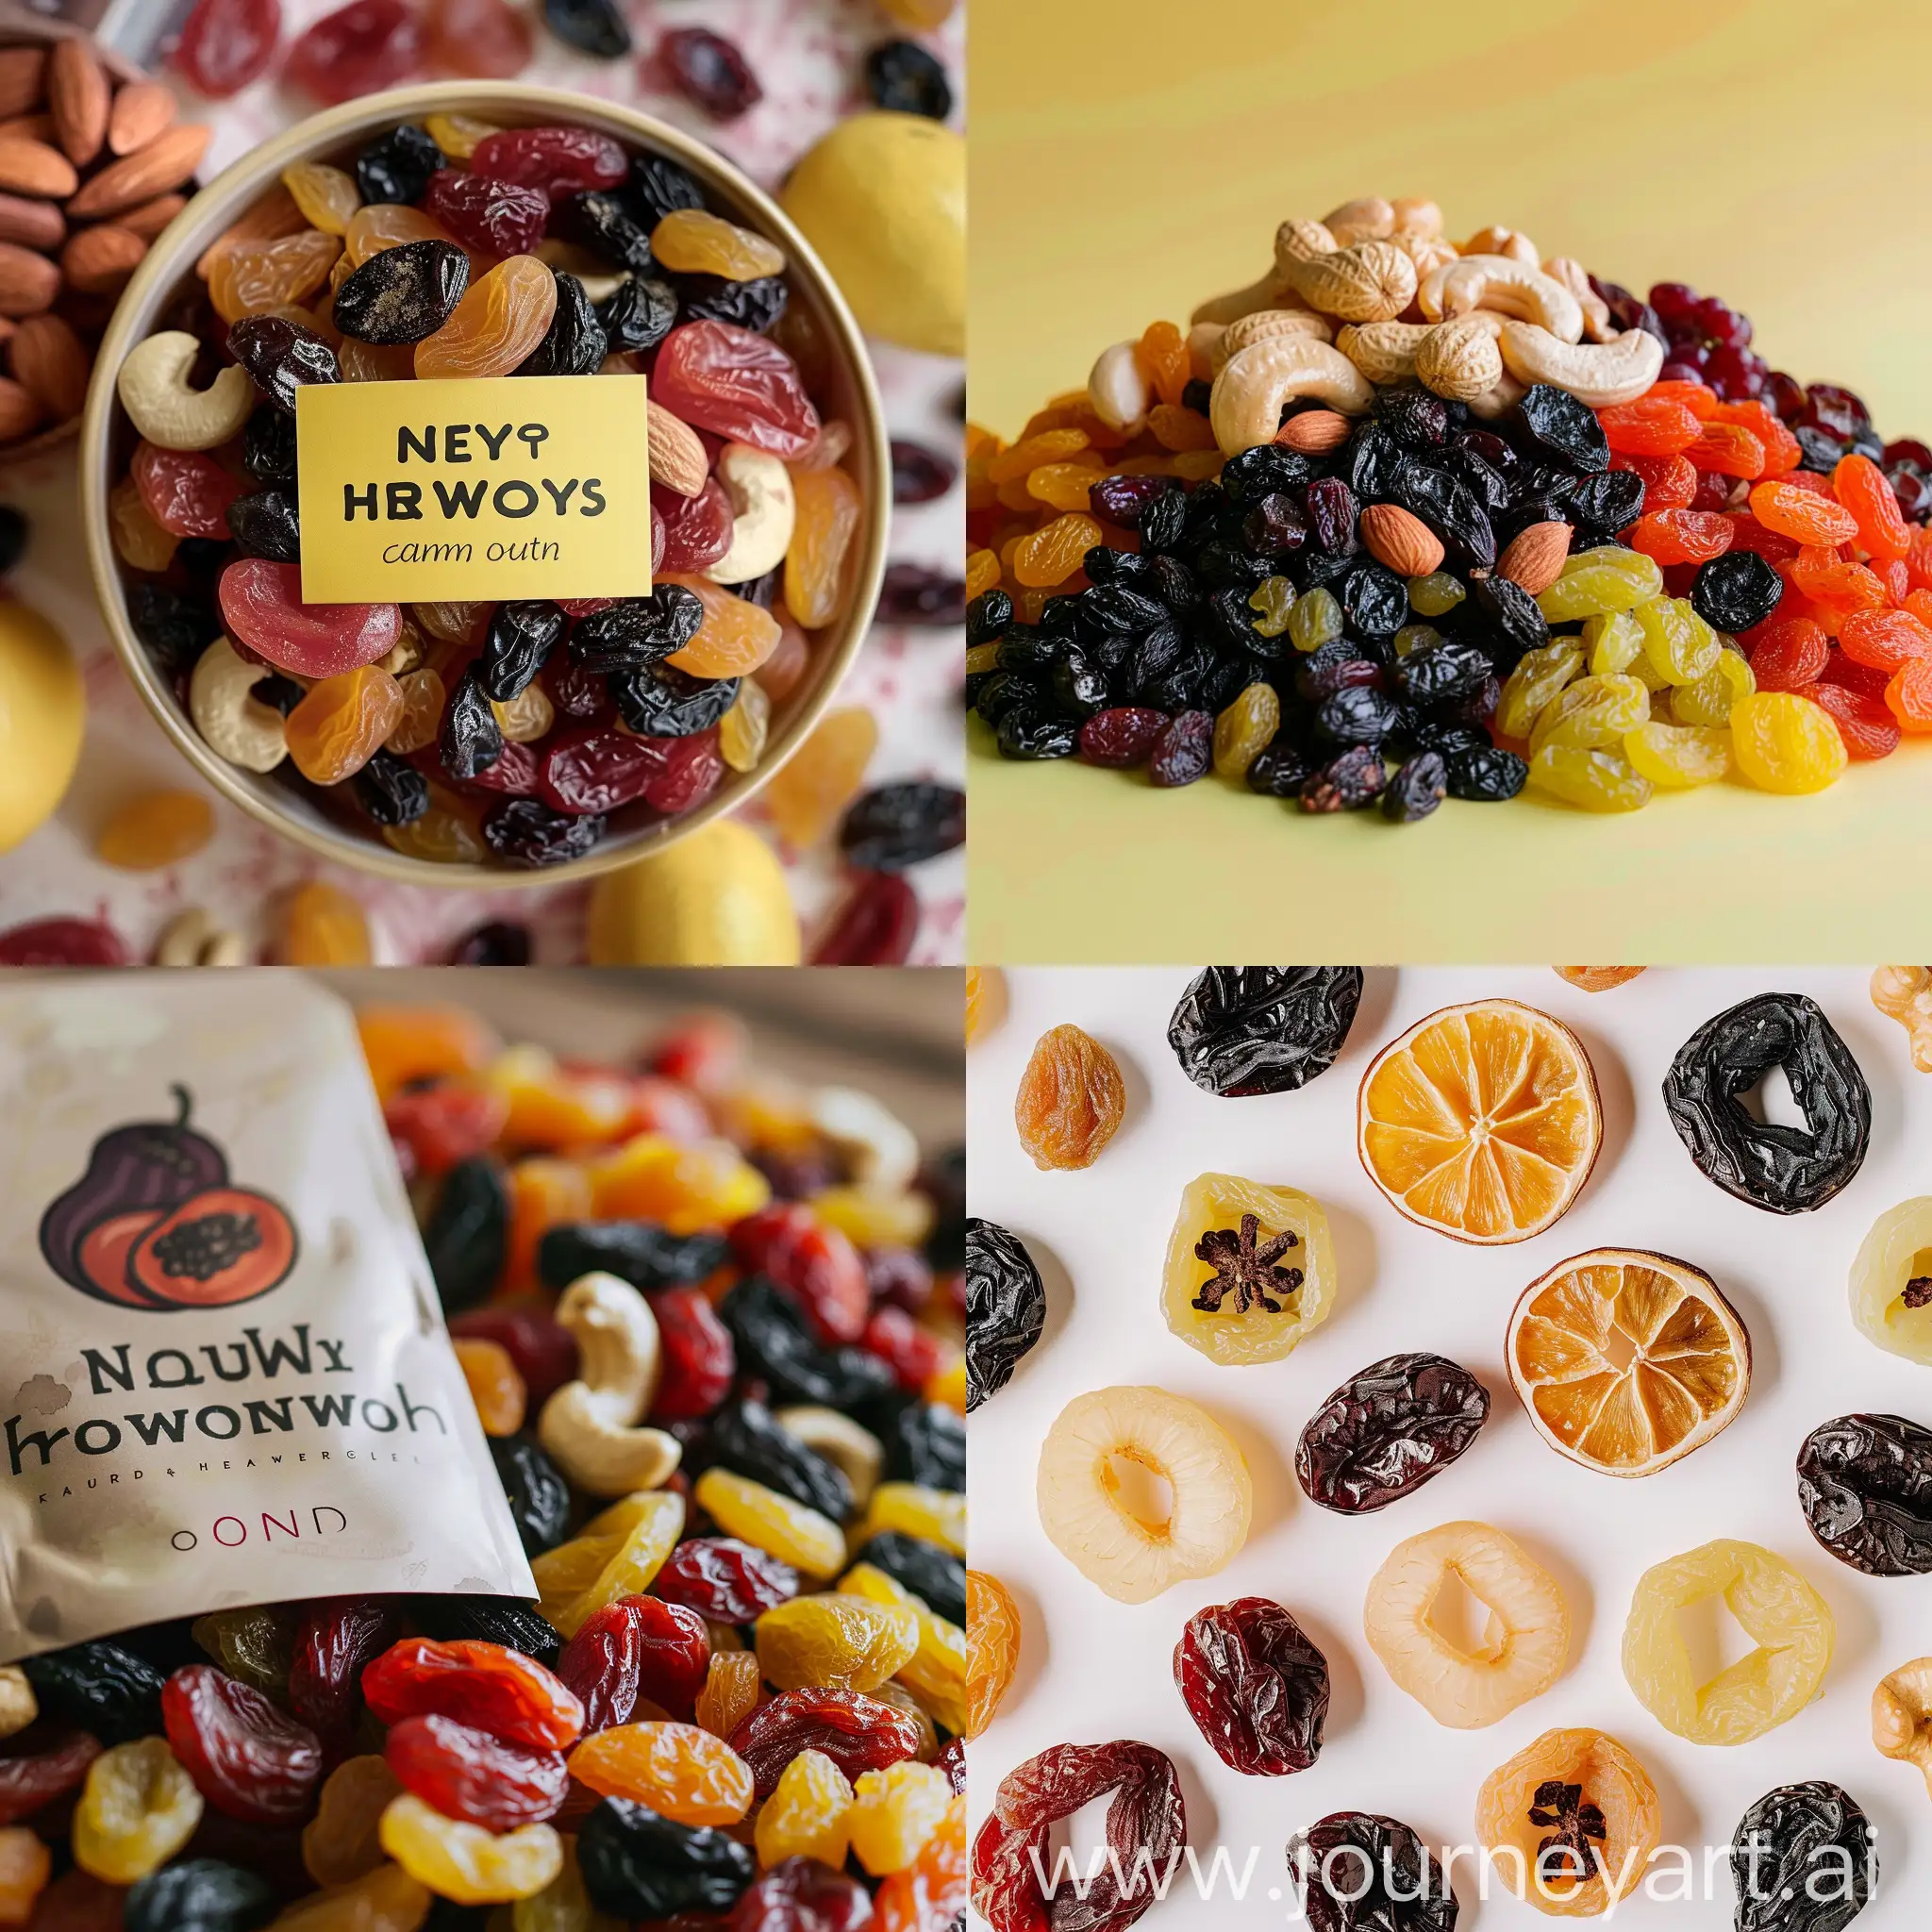 Generate an coming soon instagram post for the launch of a dried fruit brand called nutty harvest